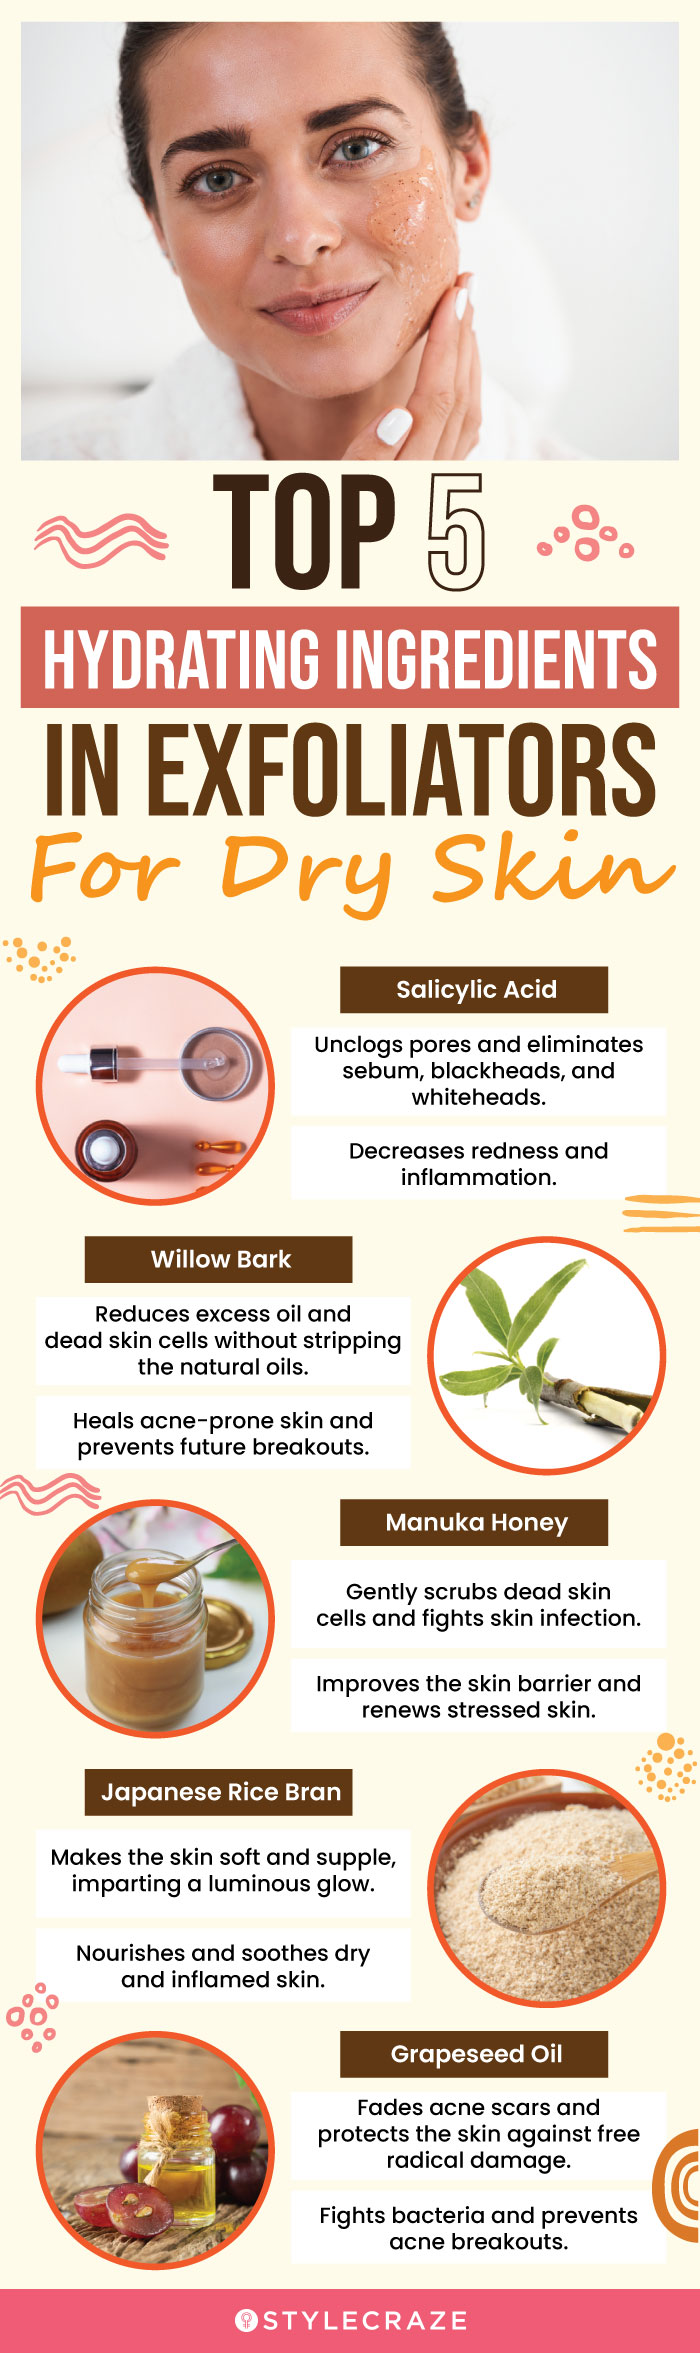 Top 5 Hydrating Ingredients In Exfoliators For Dry Skin (infographic)